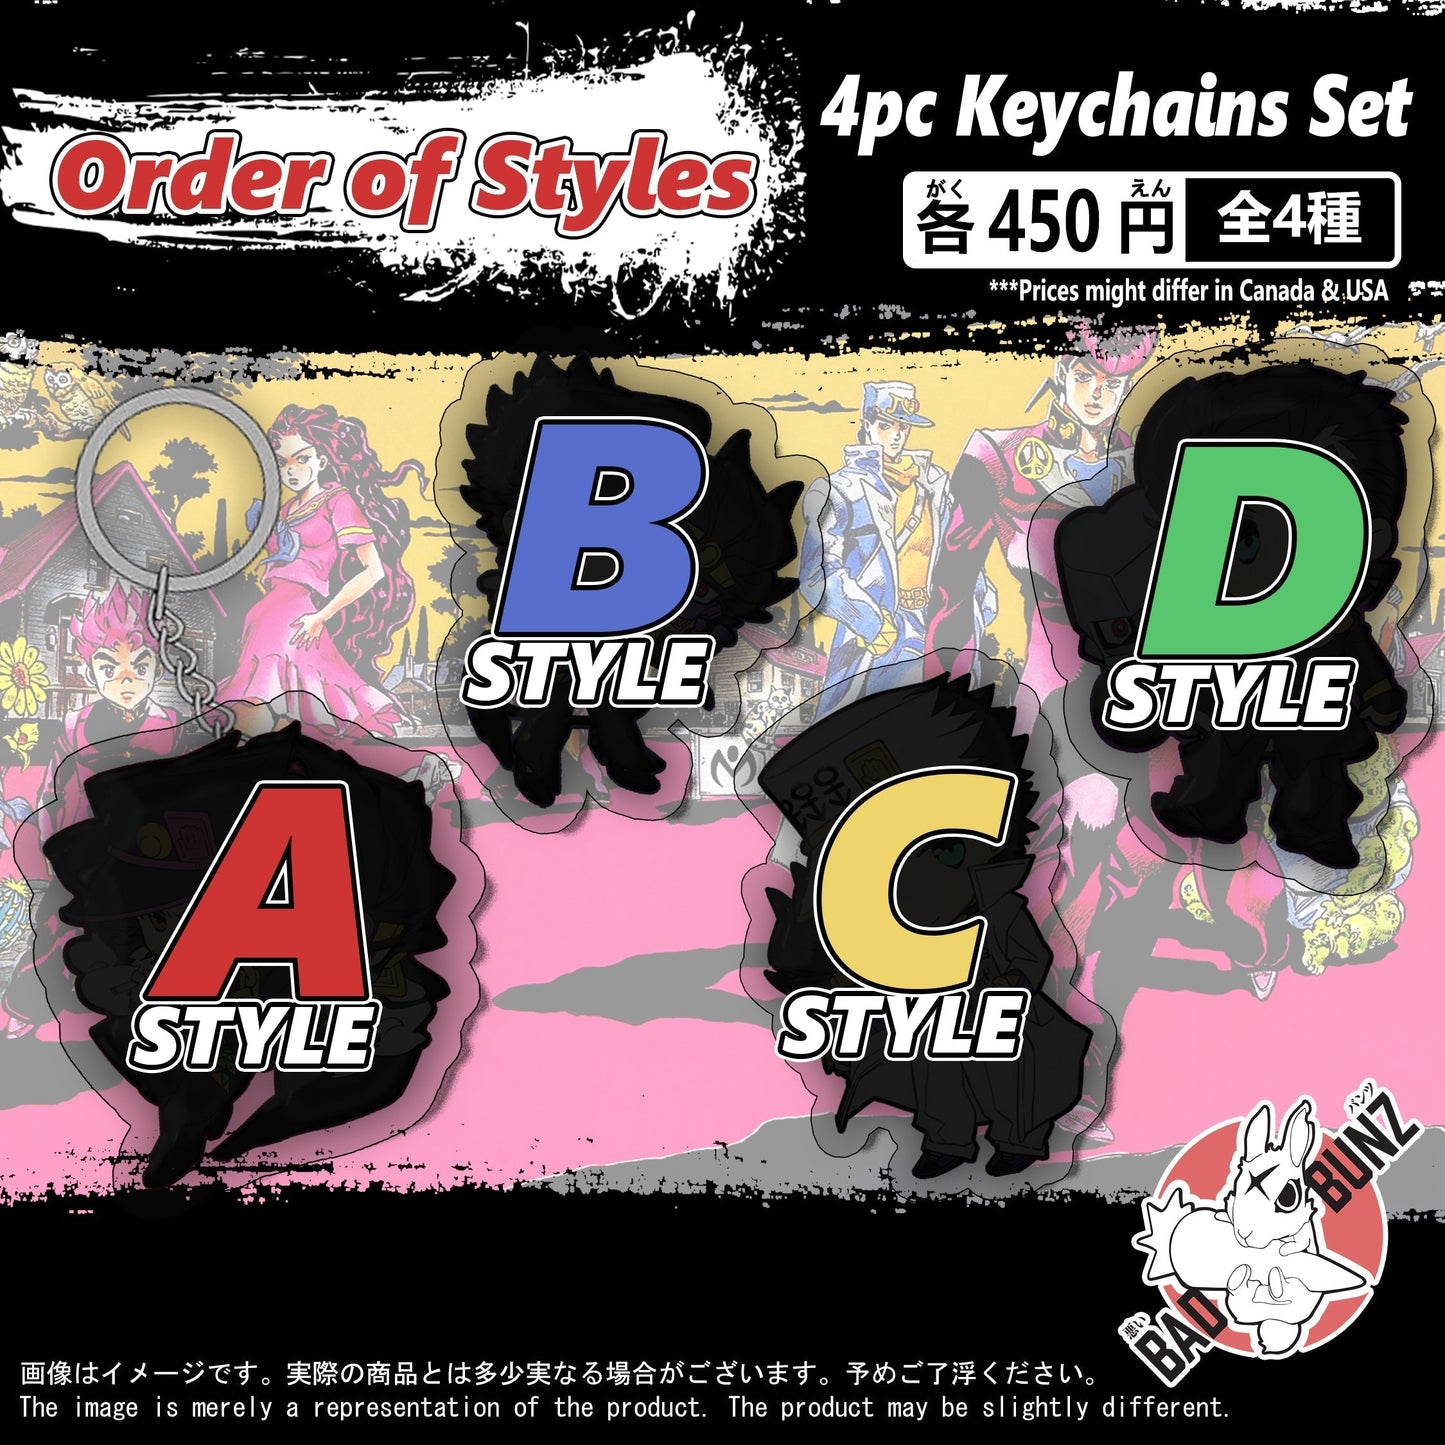 (ABYSS-01KC) Made In Abyss Anime Double-Sided Acrylic Keychain Set